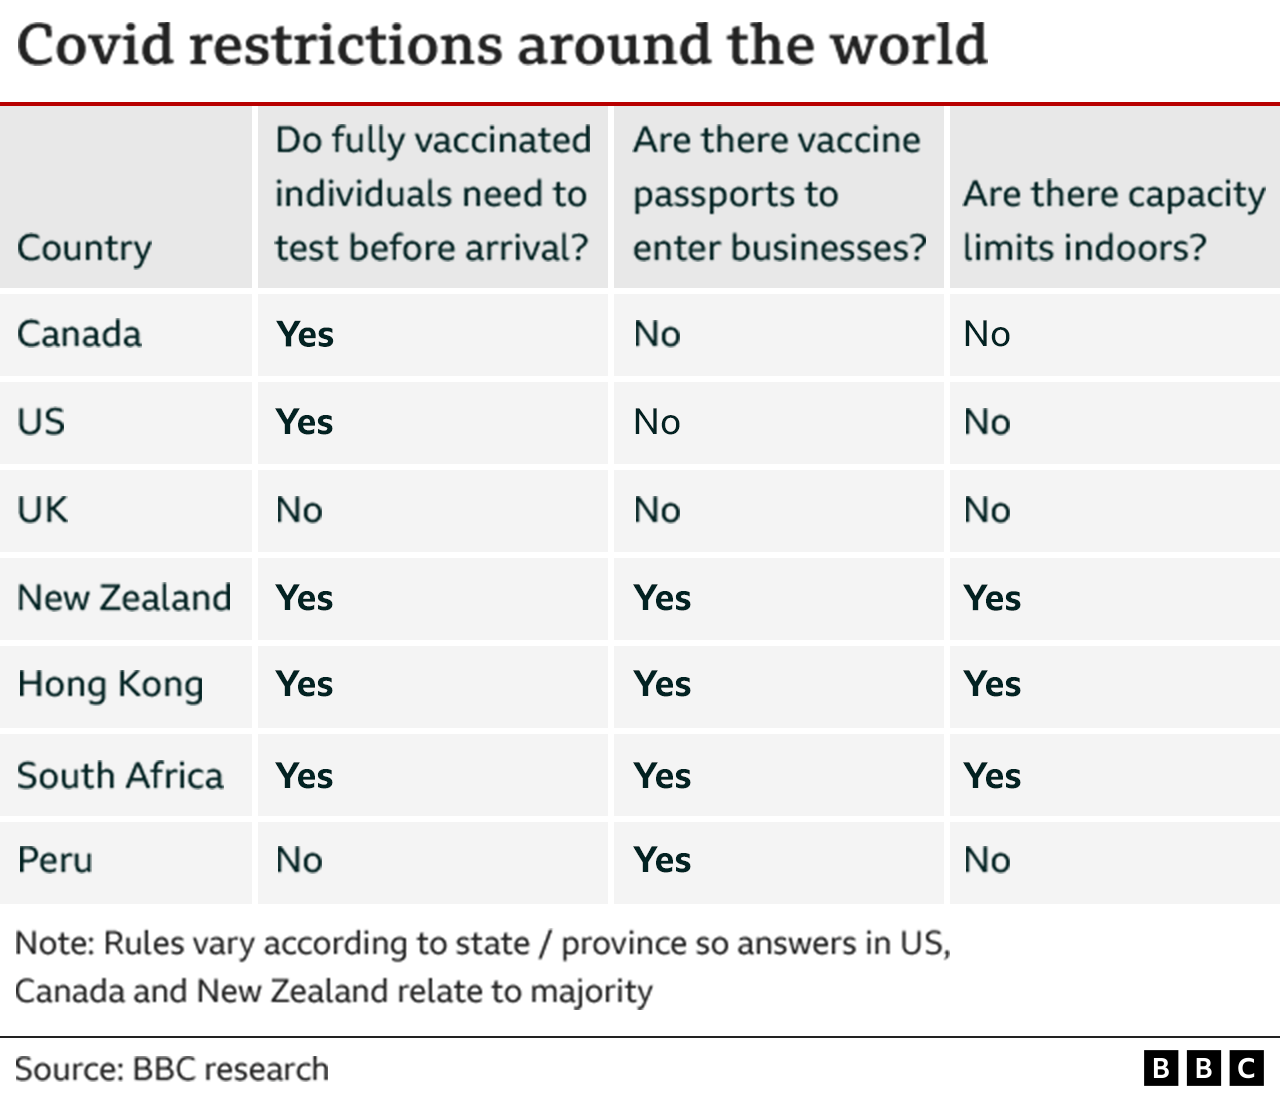 A table that let's people know about Covid restrictions around the world